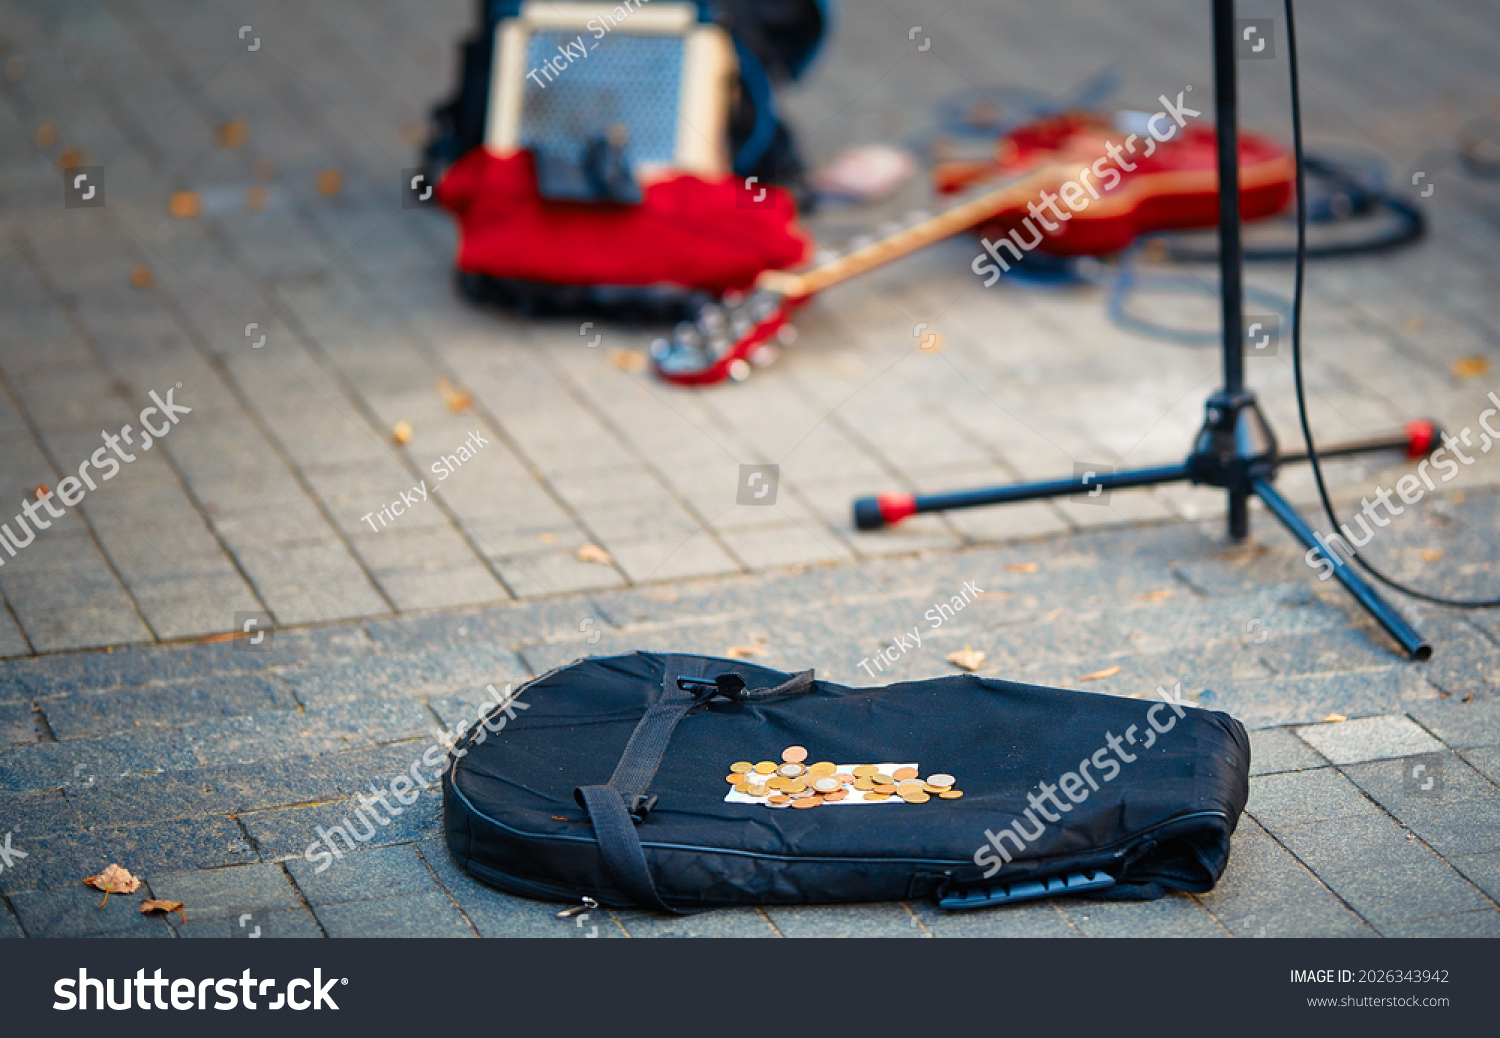 Street performers busking money. Street musician, guitar player make money. Guitar bag with coins and equipment of street musician in background.  #2026343942